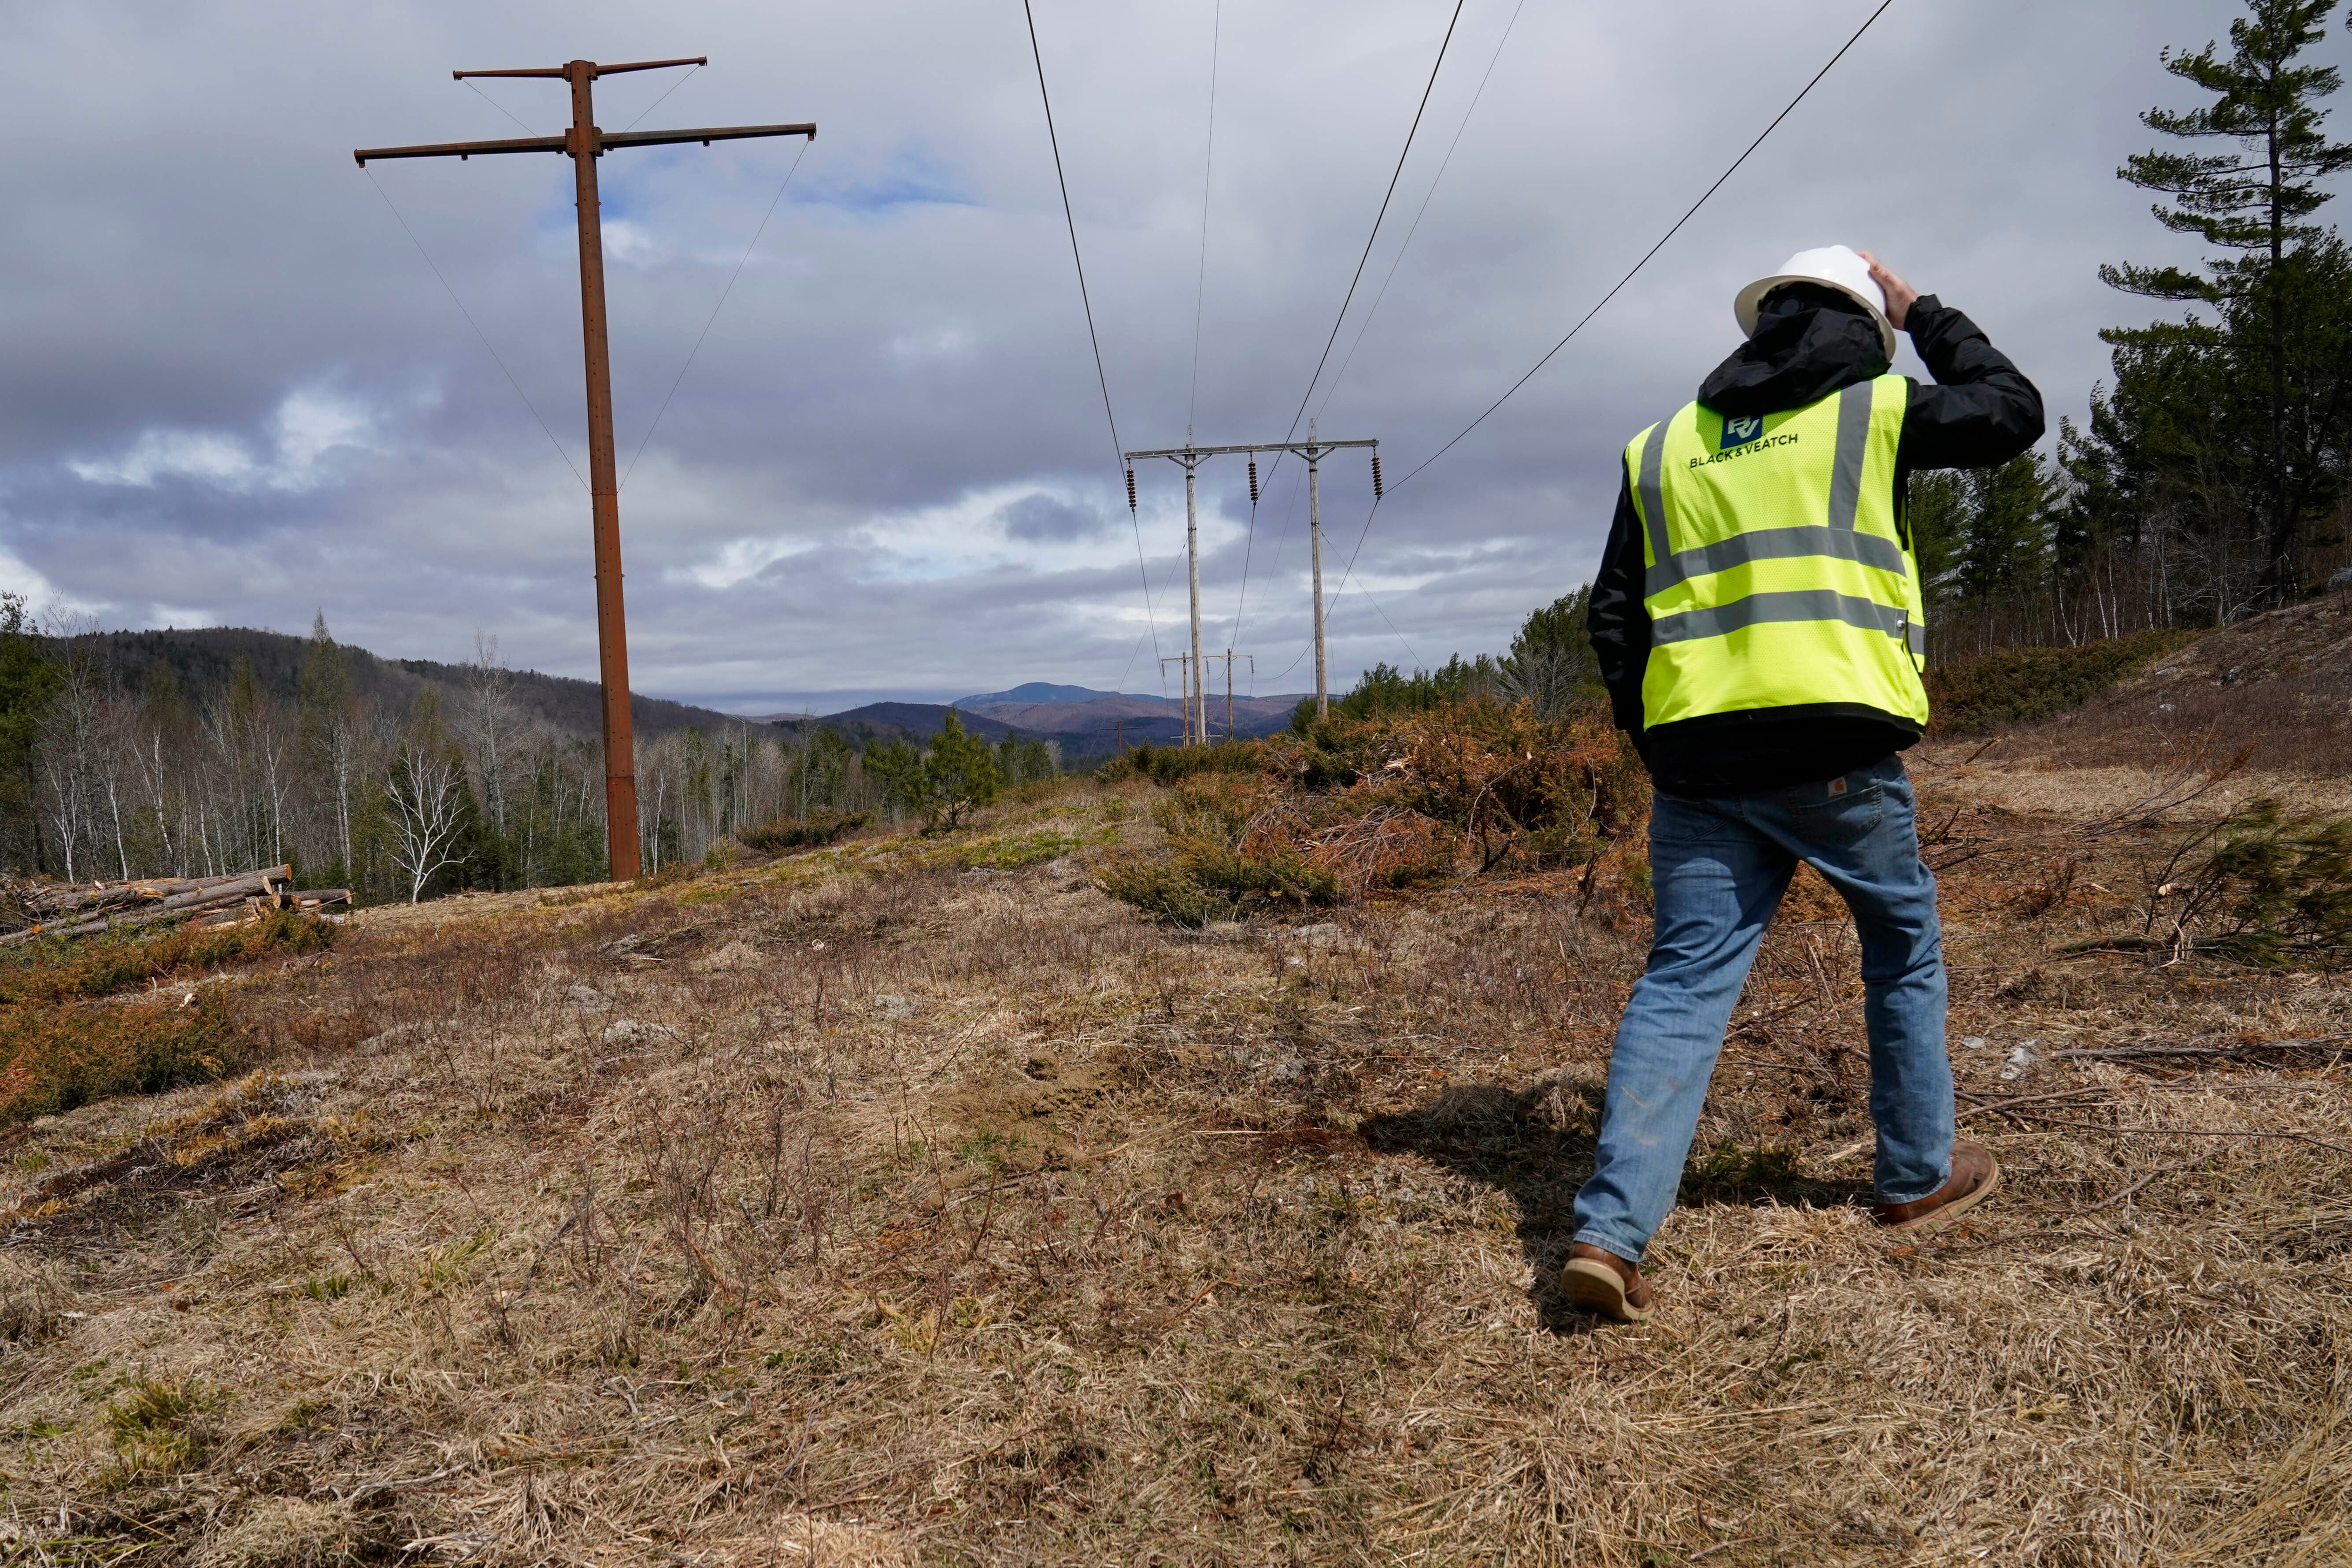 A worker inspects a Central Maine Power electricity corridor that has been widened to make way for new utility poles, April 26, 2021, near Bingham, Maine. Voters rejected a $1 billion transmission line but that is not the end of the polarizing project in the woods of western Maine.